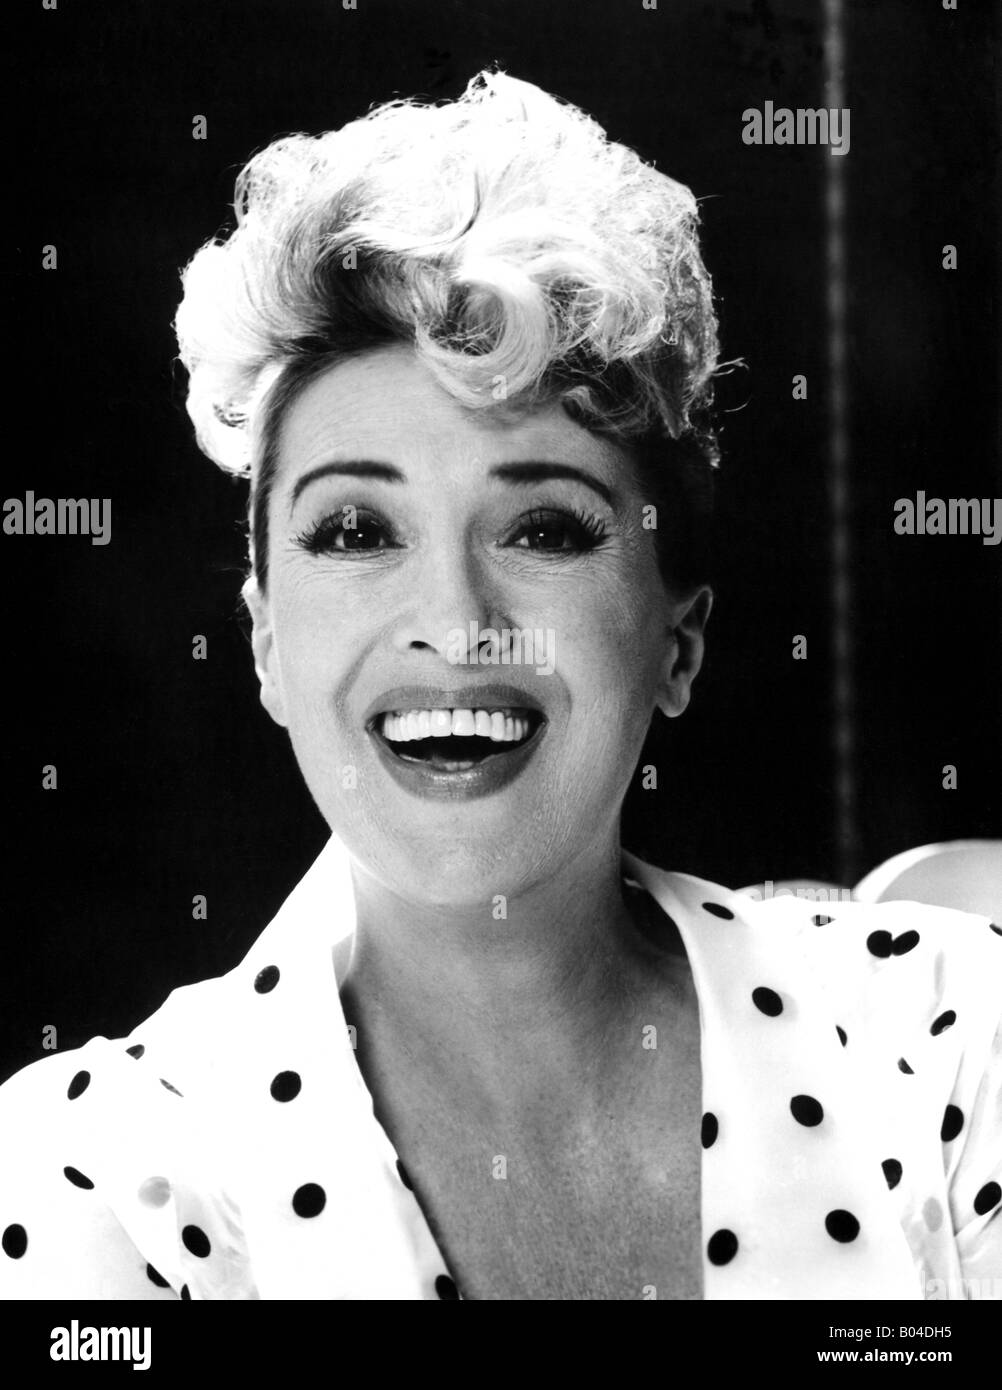 GYPSY ROSE LEE - American burlesque artiste who appeared in several films  Stock Photo - Alamy